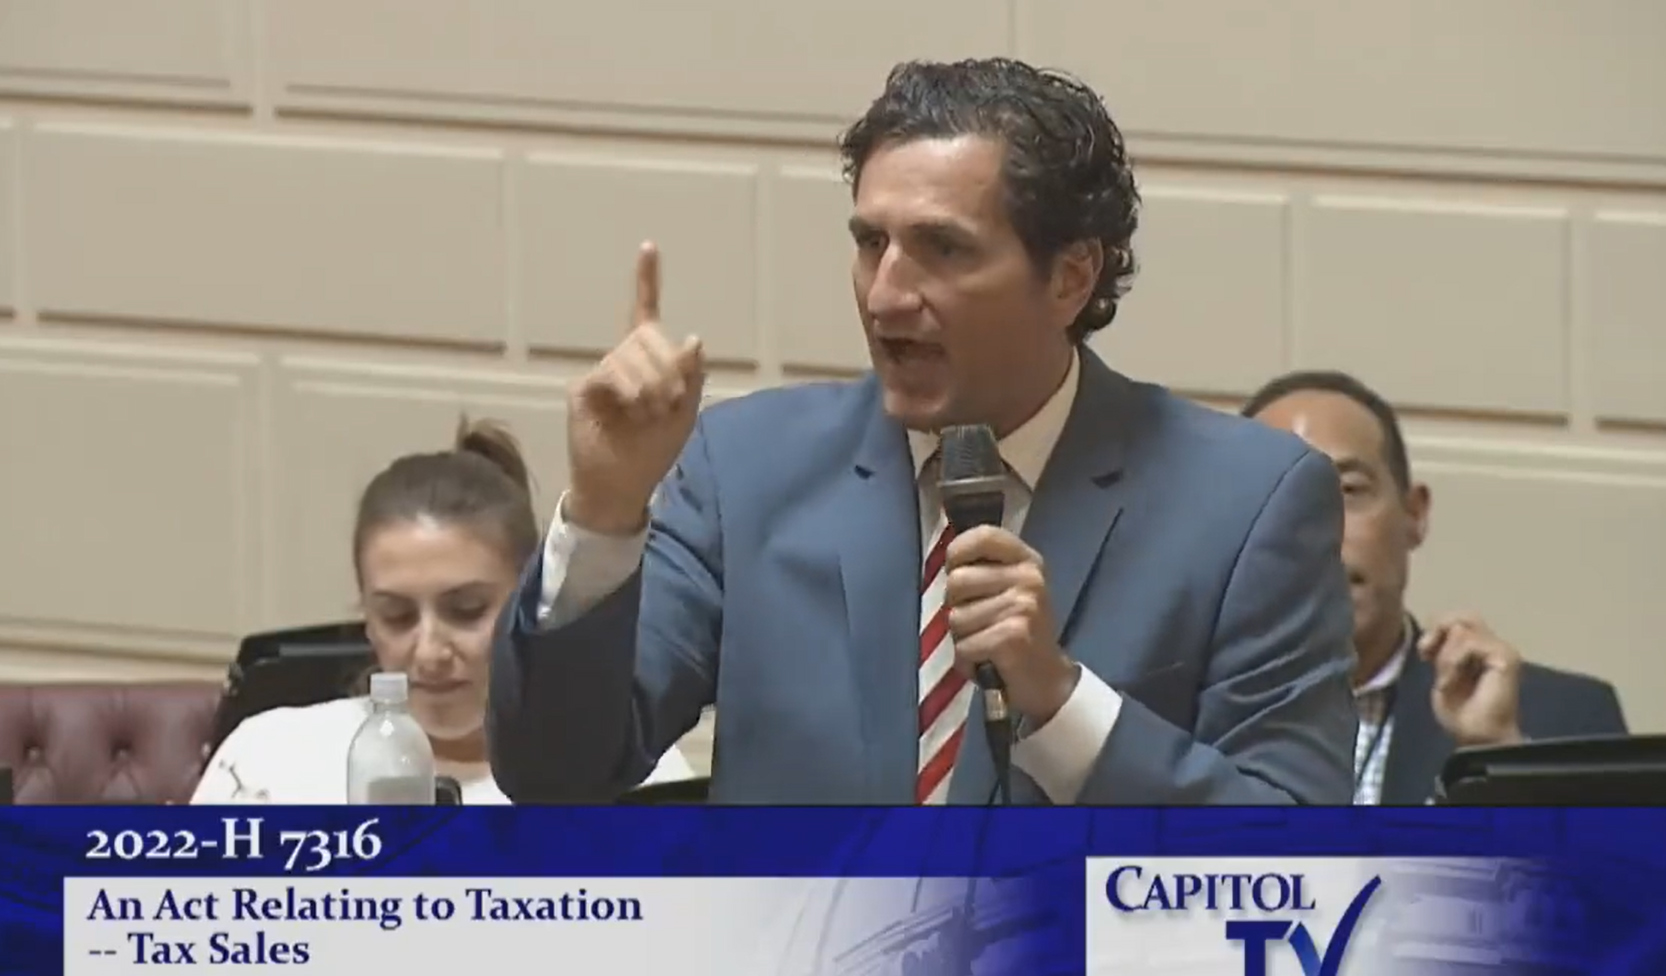 [Video] Blake Filippi passionately fights for struggling homeowning families & against Democrats’ cronyism